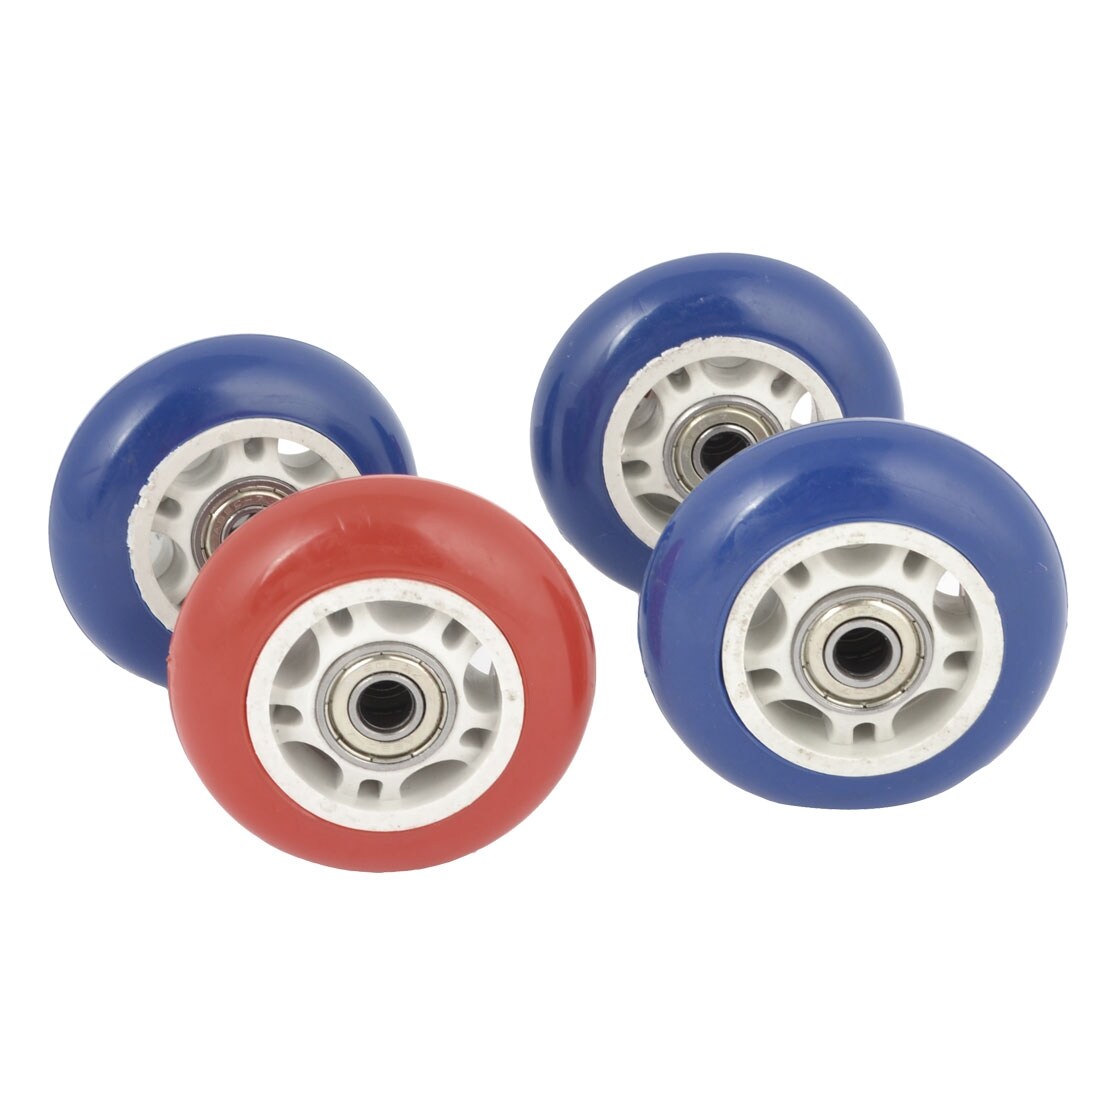 Red Plastic 70mm Dia 608ZZ Inline Single Wheel for Skating Skate Shoes 